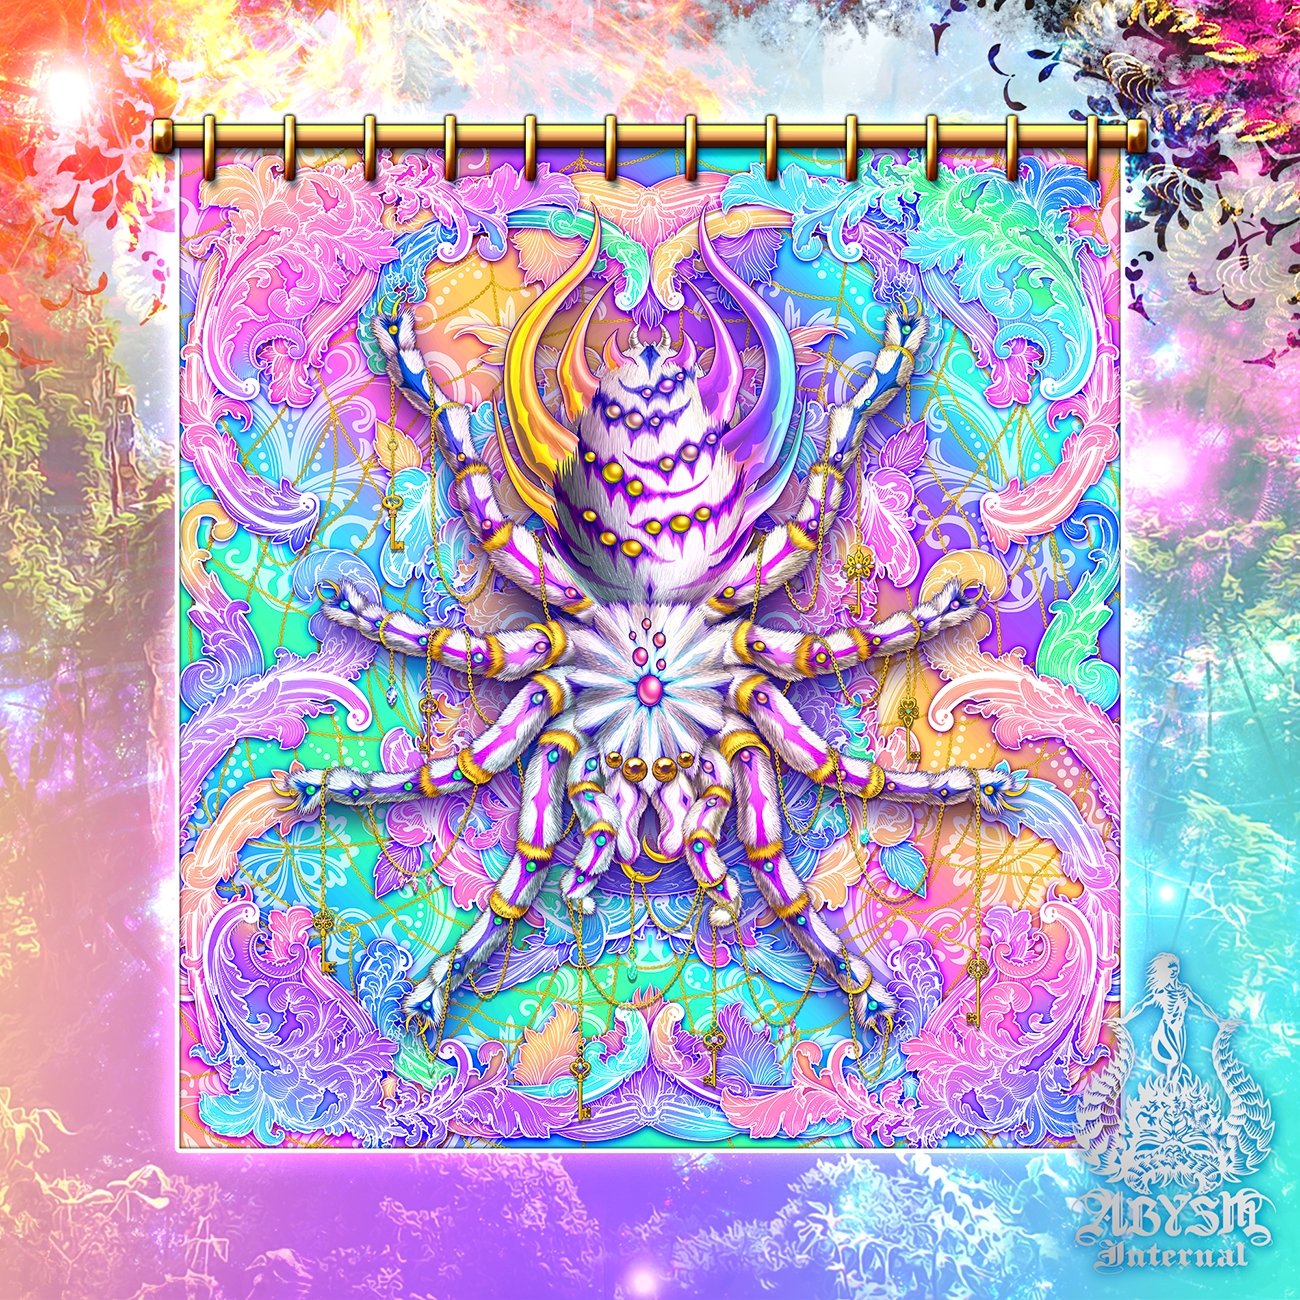 Aesthetic Shower Curtain, Psychedelic Bathroom Decor, Holographic Pastel Home -Spider, Tarantula Art - Abysm Internal